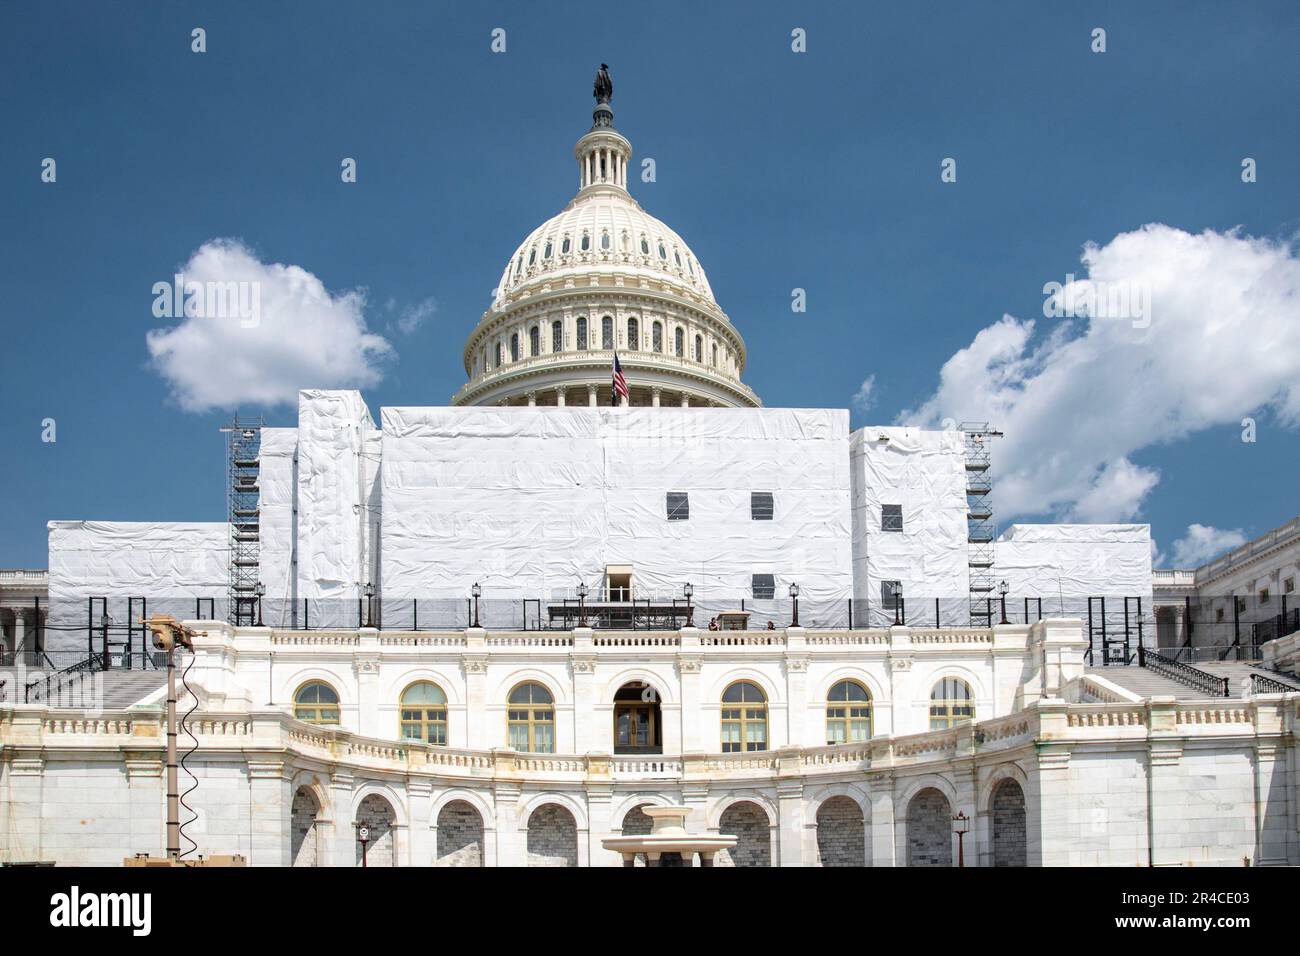 Washington, DC - Repairs underway on the west front of the U.S. Capitol building. The project is intended to clean and repair the building's historic Stock Photo